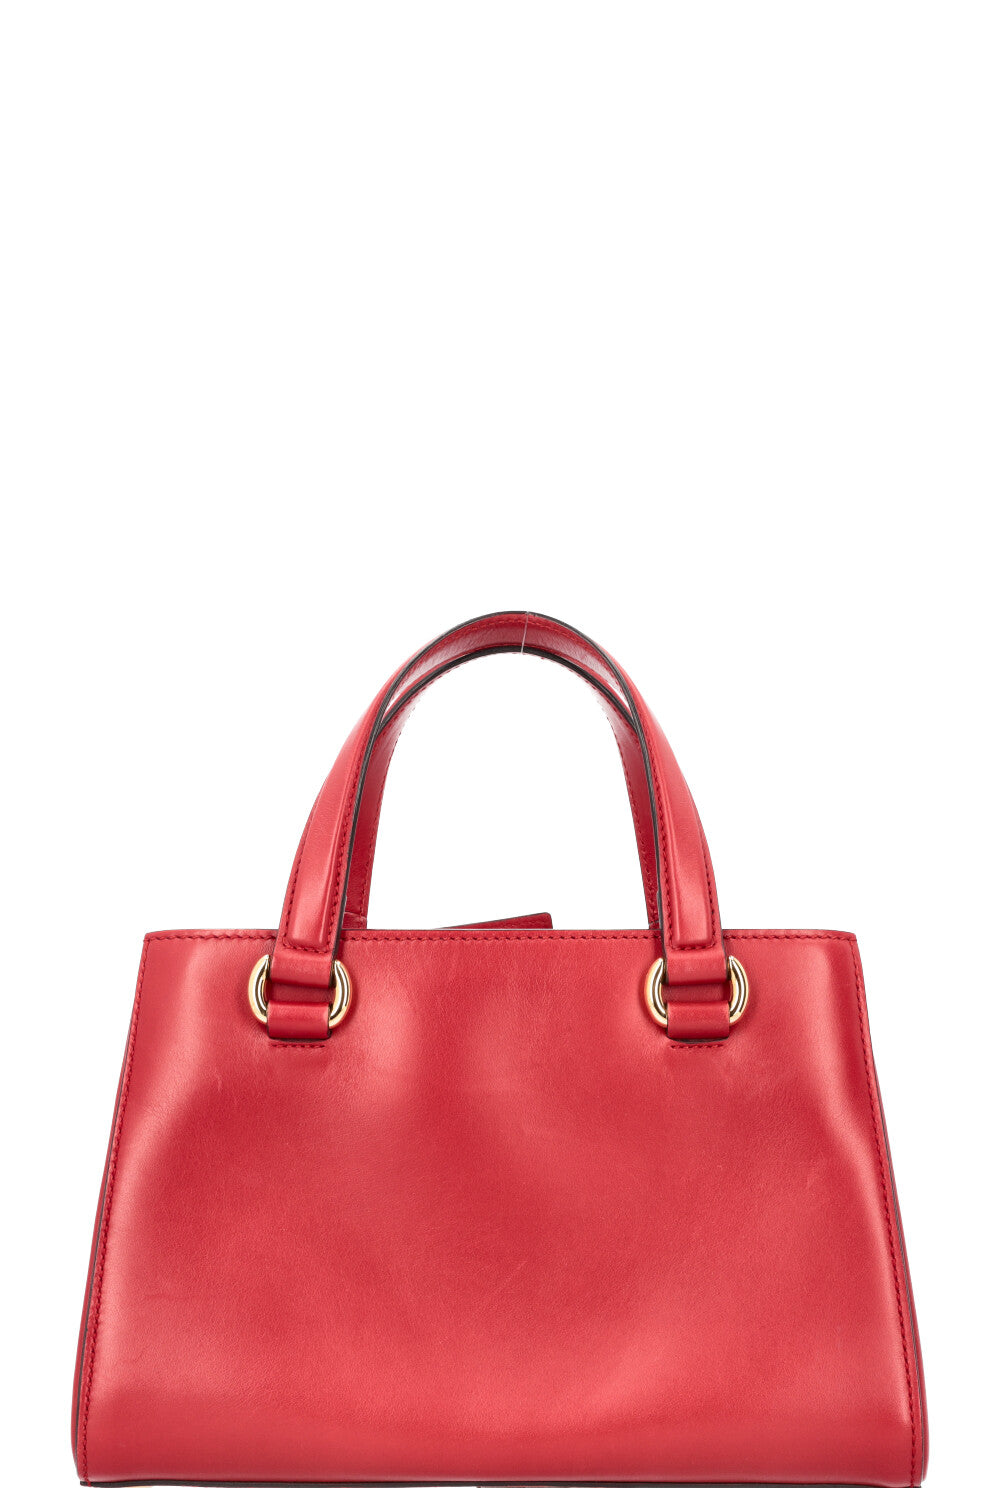 GUCCI Sylvie Chain Tote Bag Red